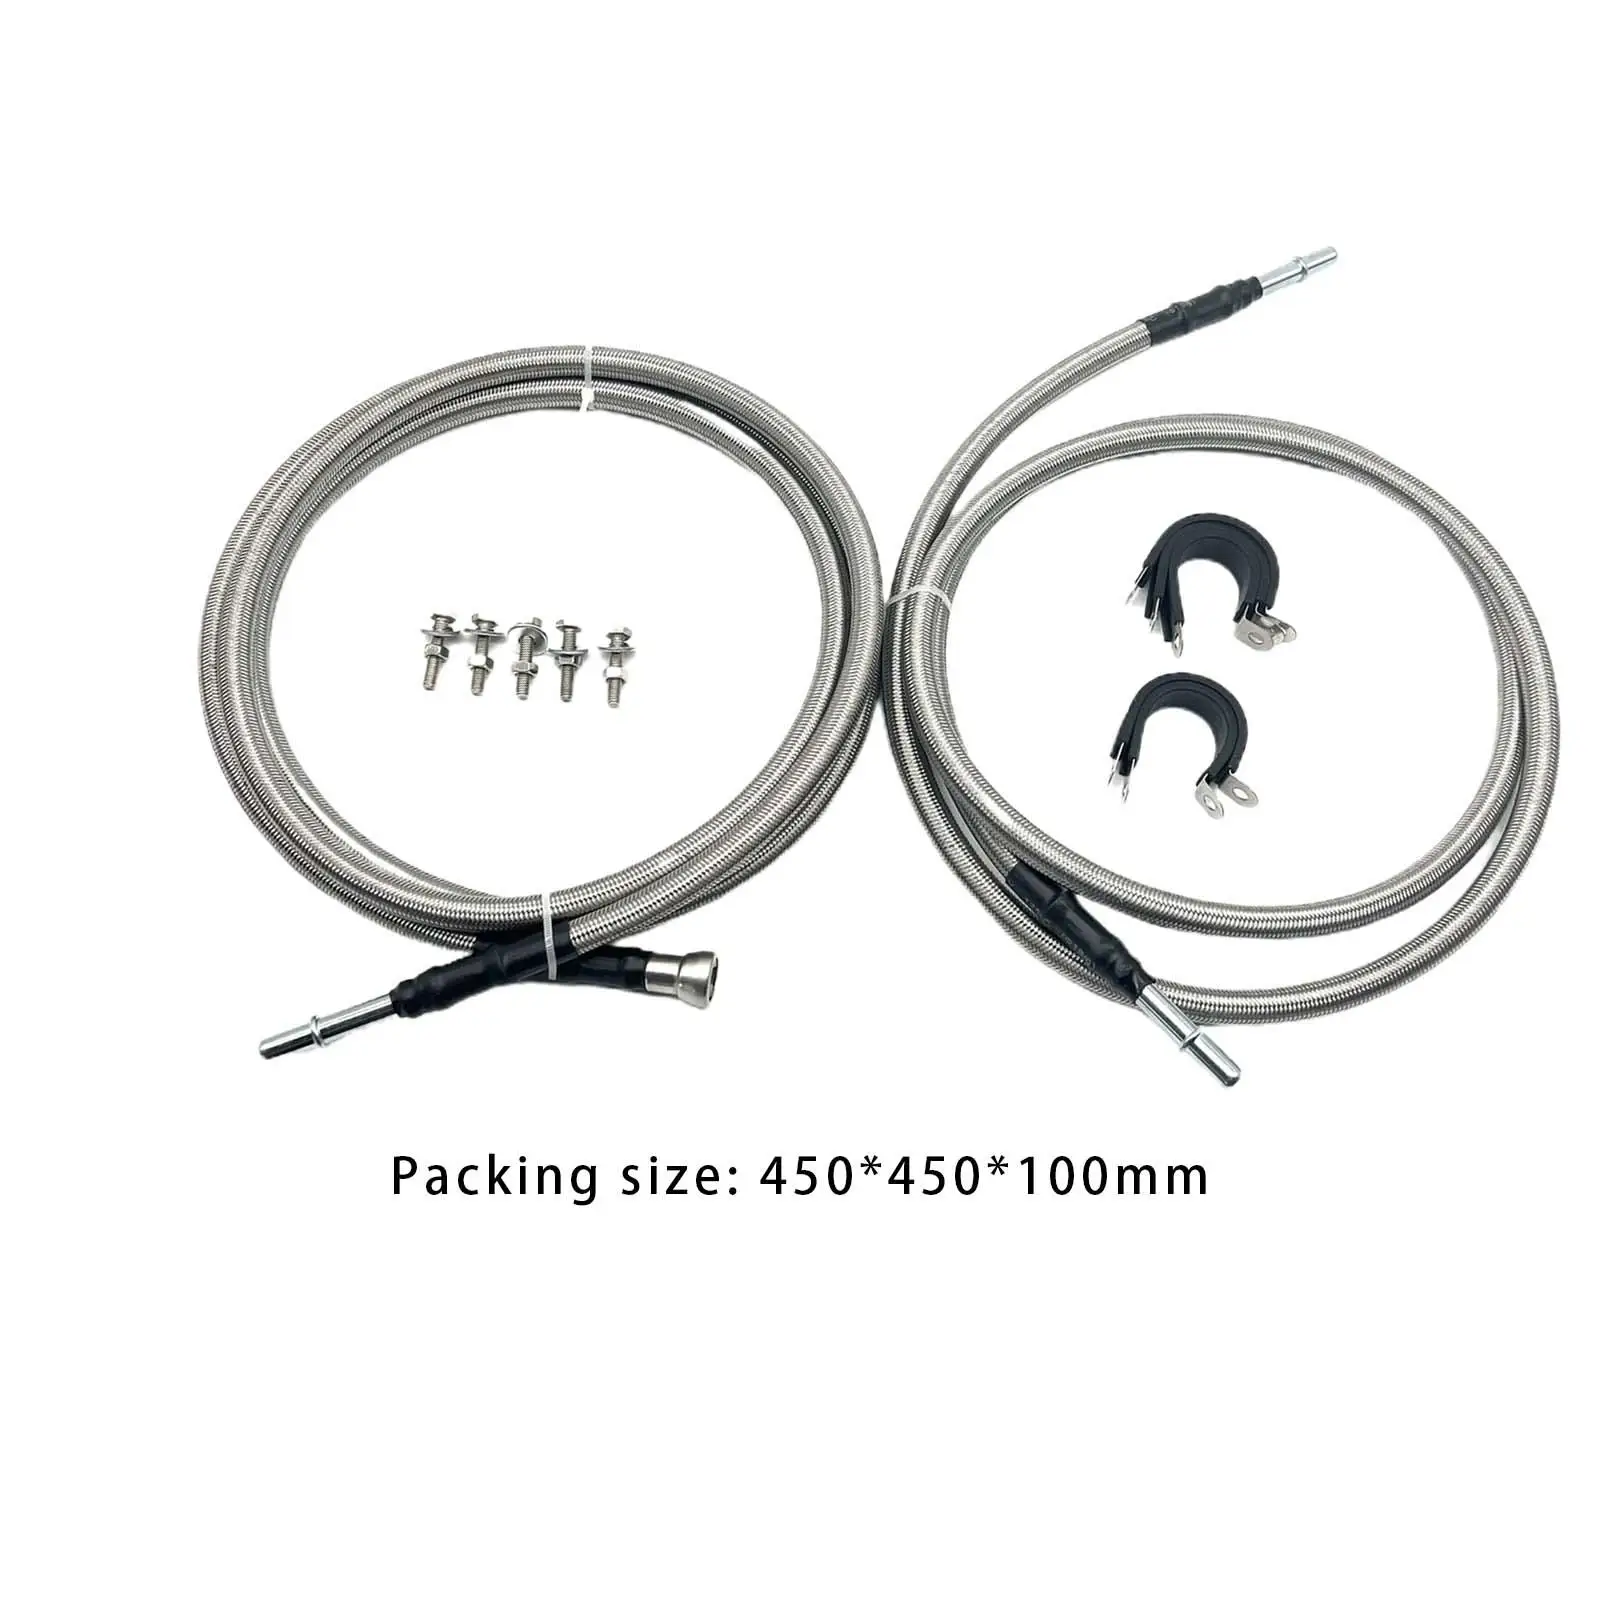 Fuel Line Quick Fix Set Easy to Install Spare Parts Accessory Professional Direct Replaces for Chevy Silverado 2004-2010